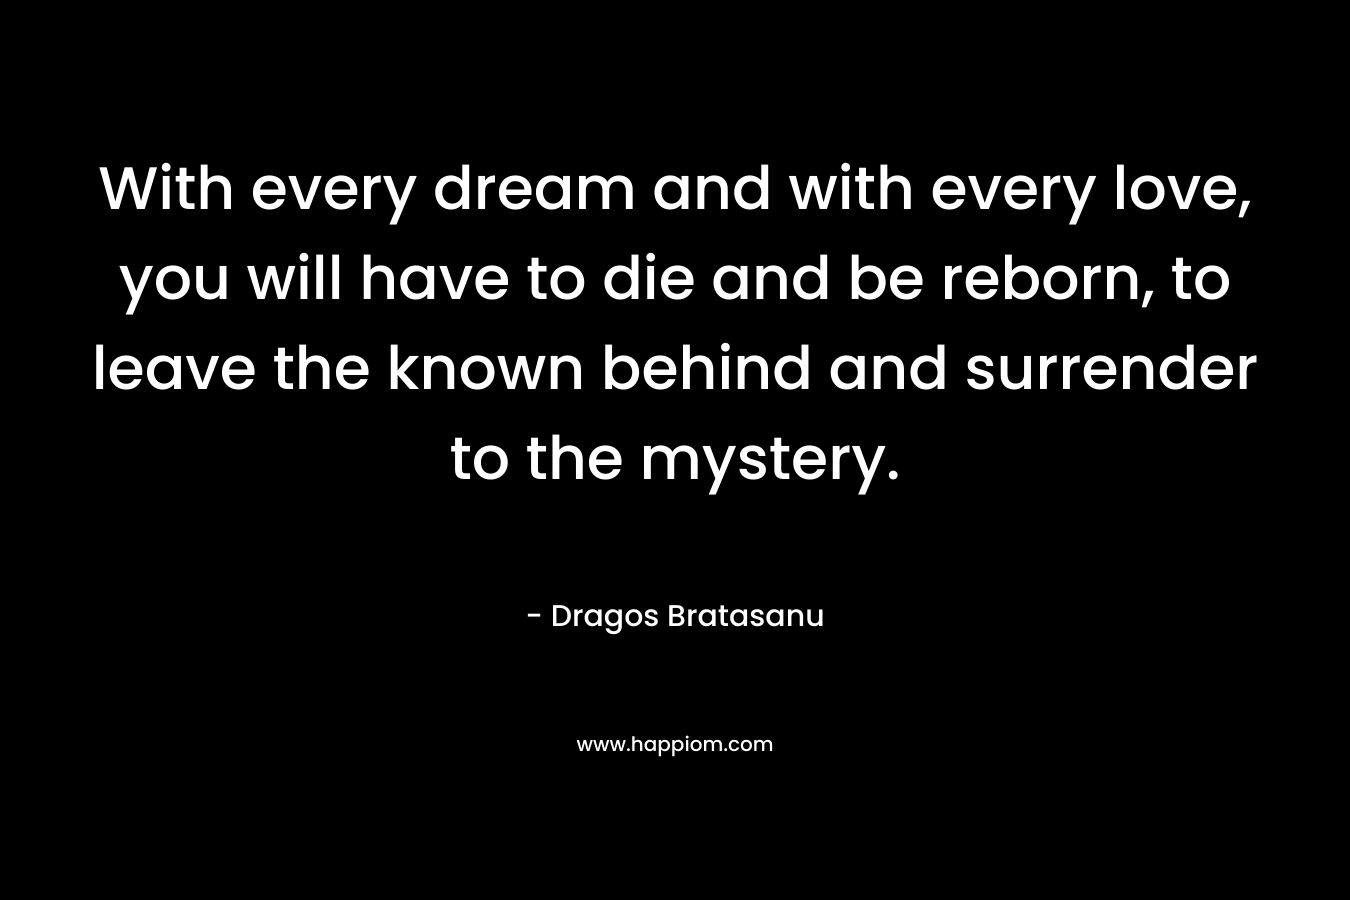 With every dream and with every love, you will have to die and be reborn, to leave the known behind and surrender to the mystery. – Dragos Bratasanu